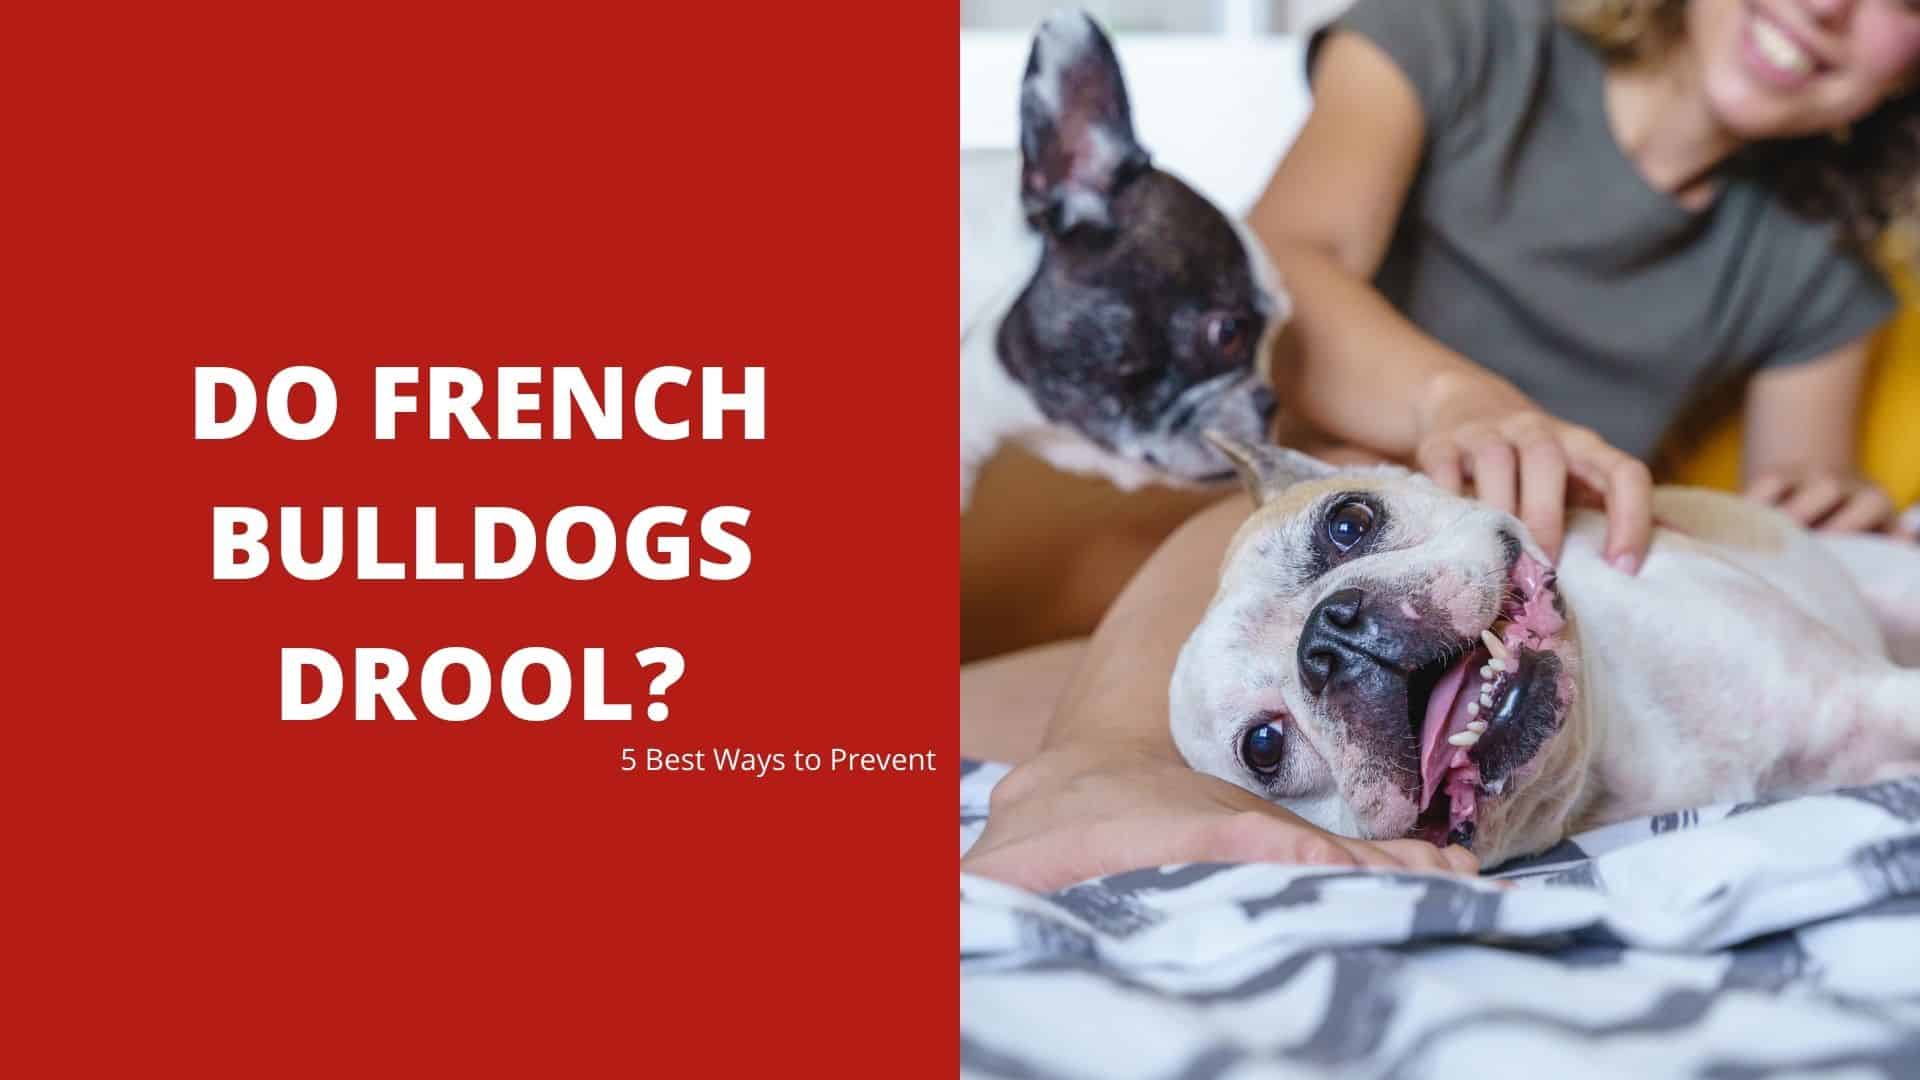 Do French Bulldogs Drool? 5 Best Ways to Prevent